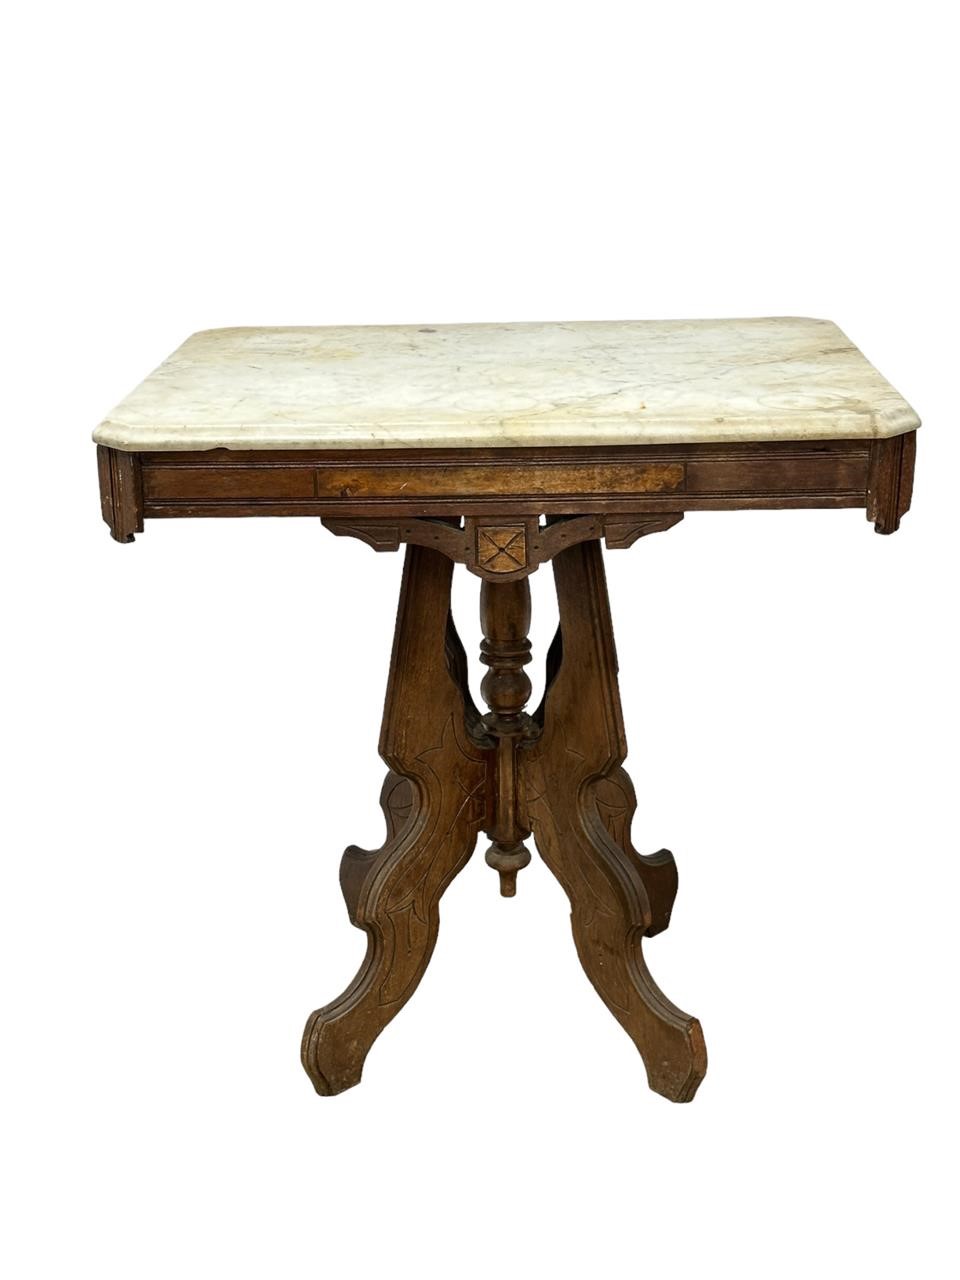 Antique Marble Top Wood Carved Occasional Table